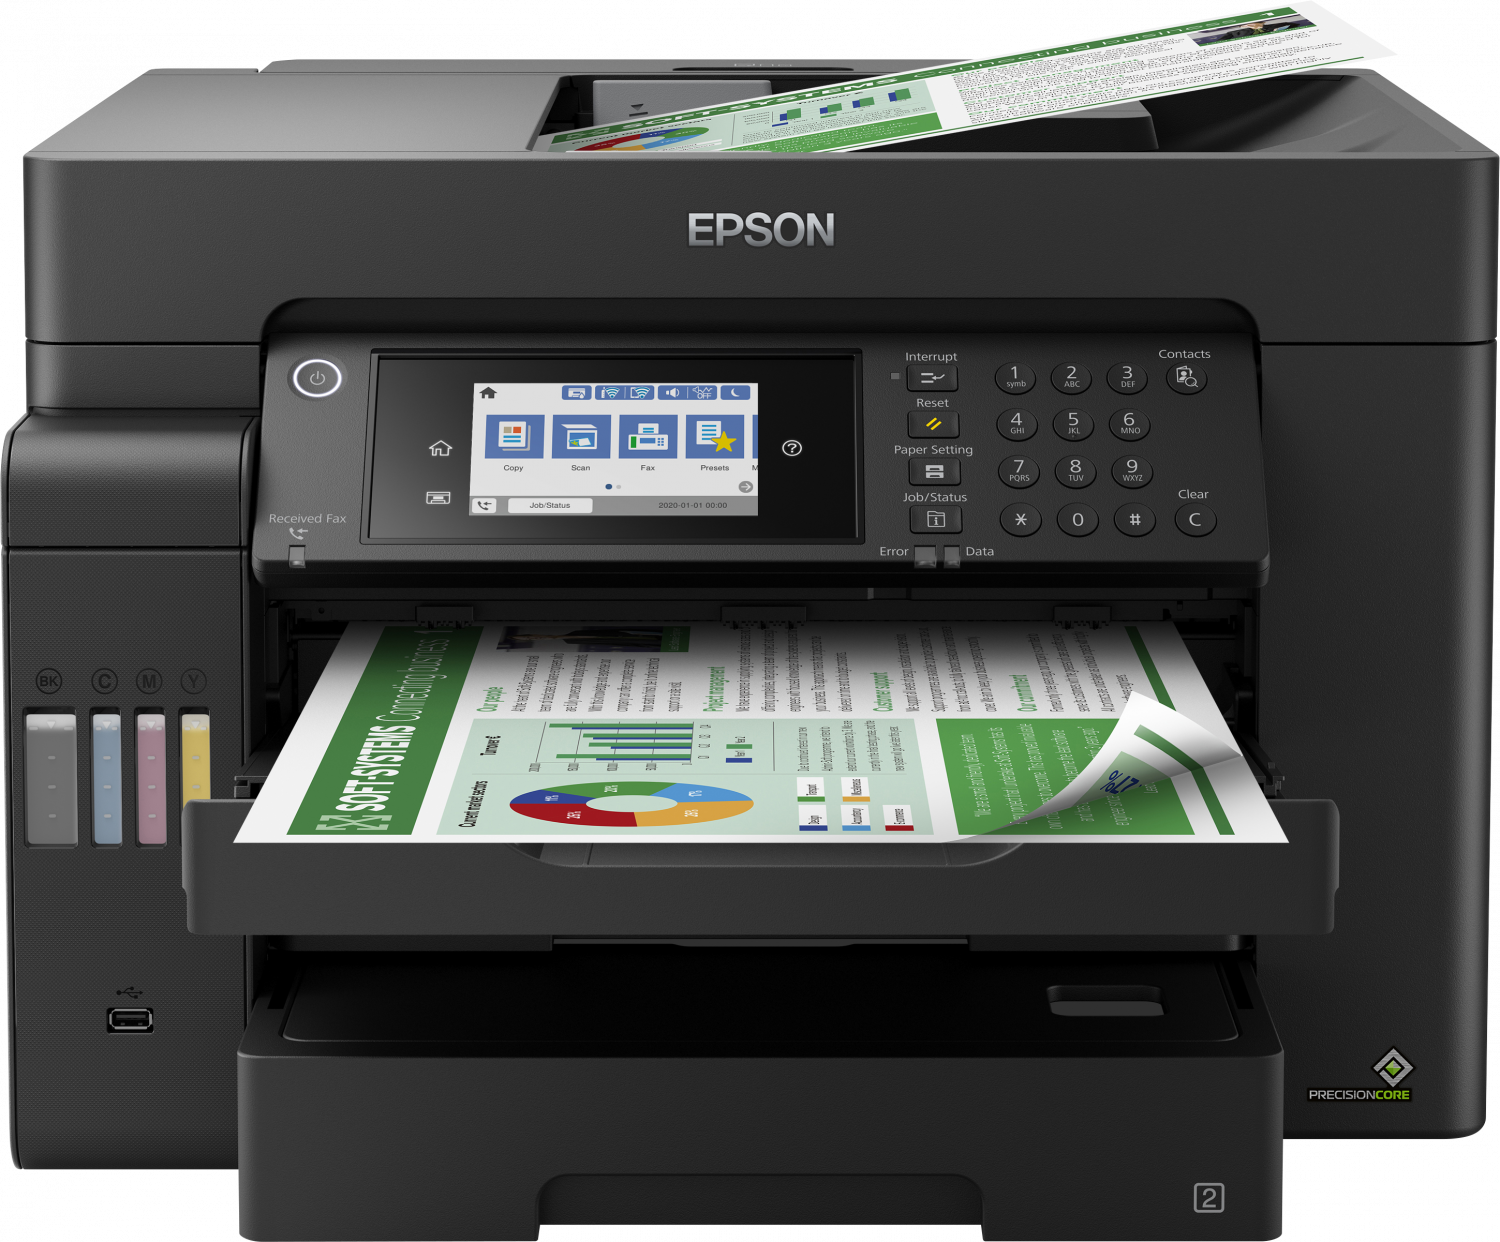 Step-by-step Driver Epson Printer L15150/L15160 Kali Linux Installation - Featured